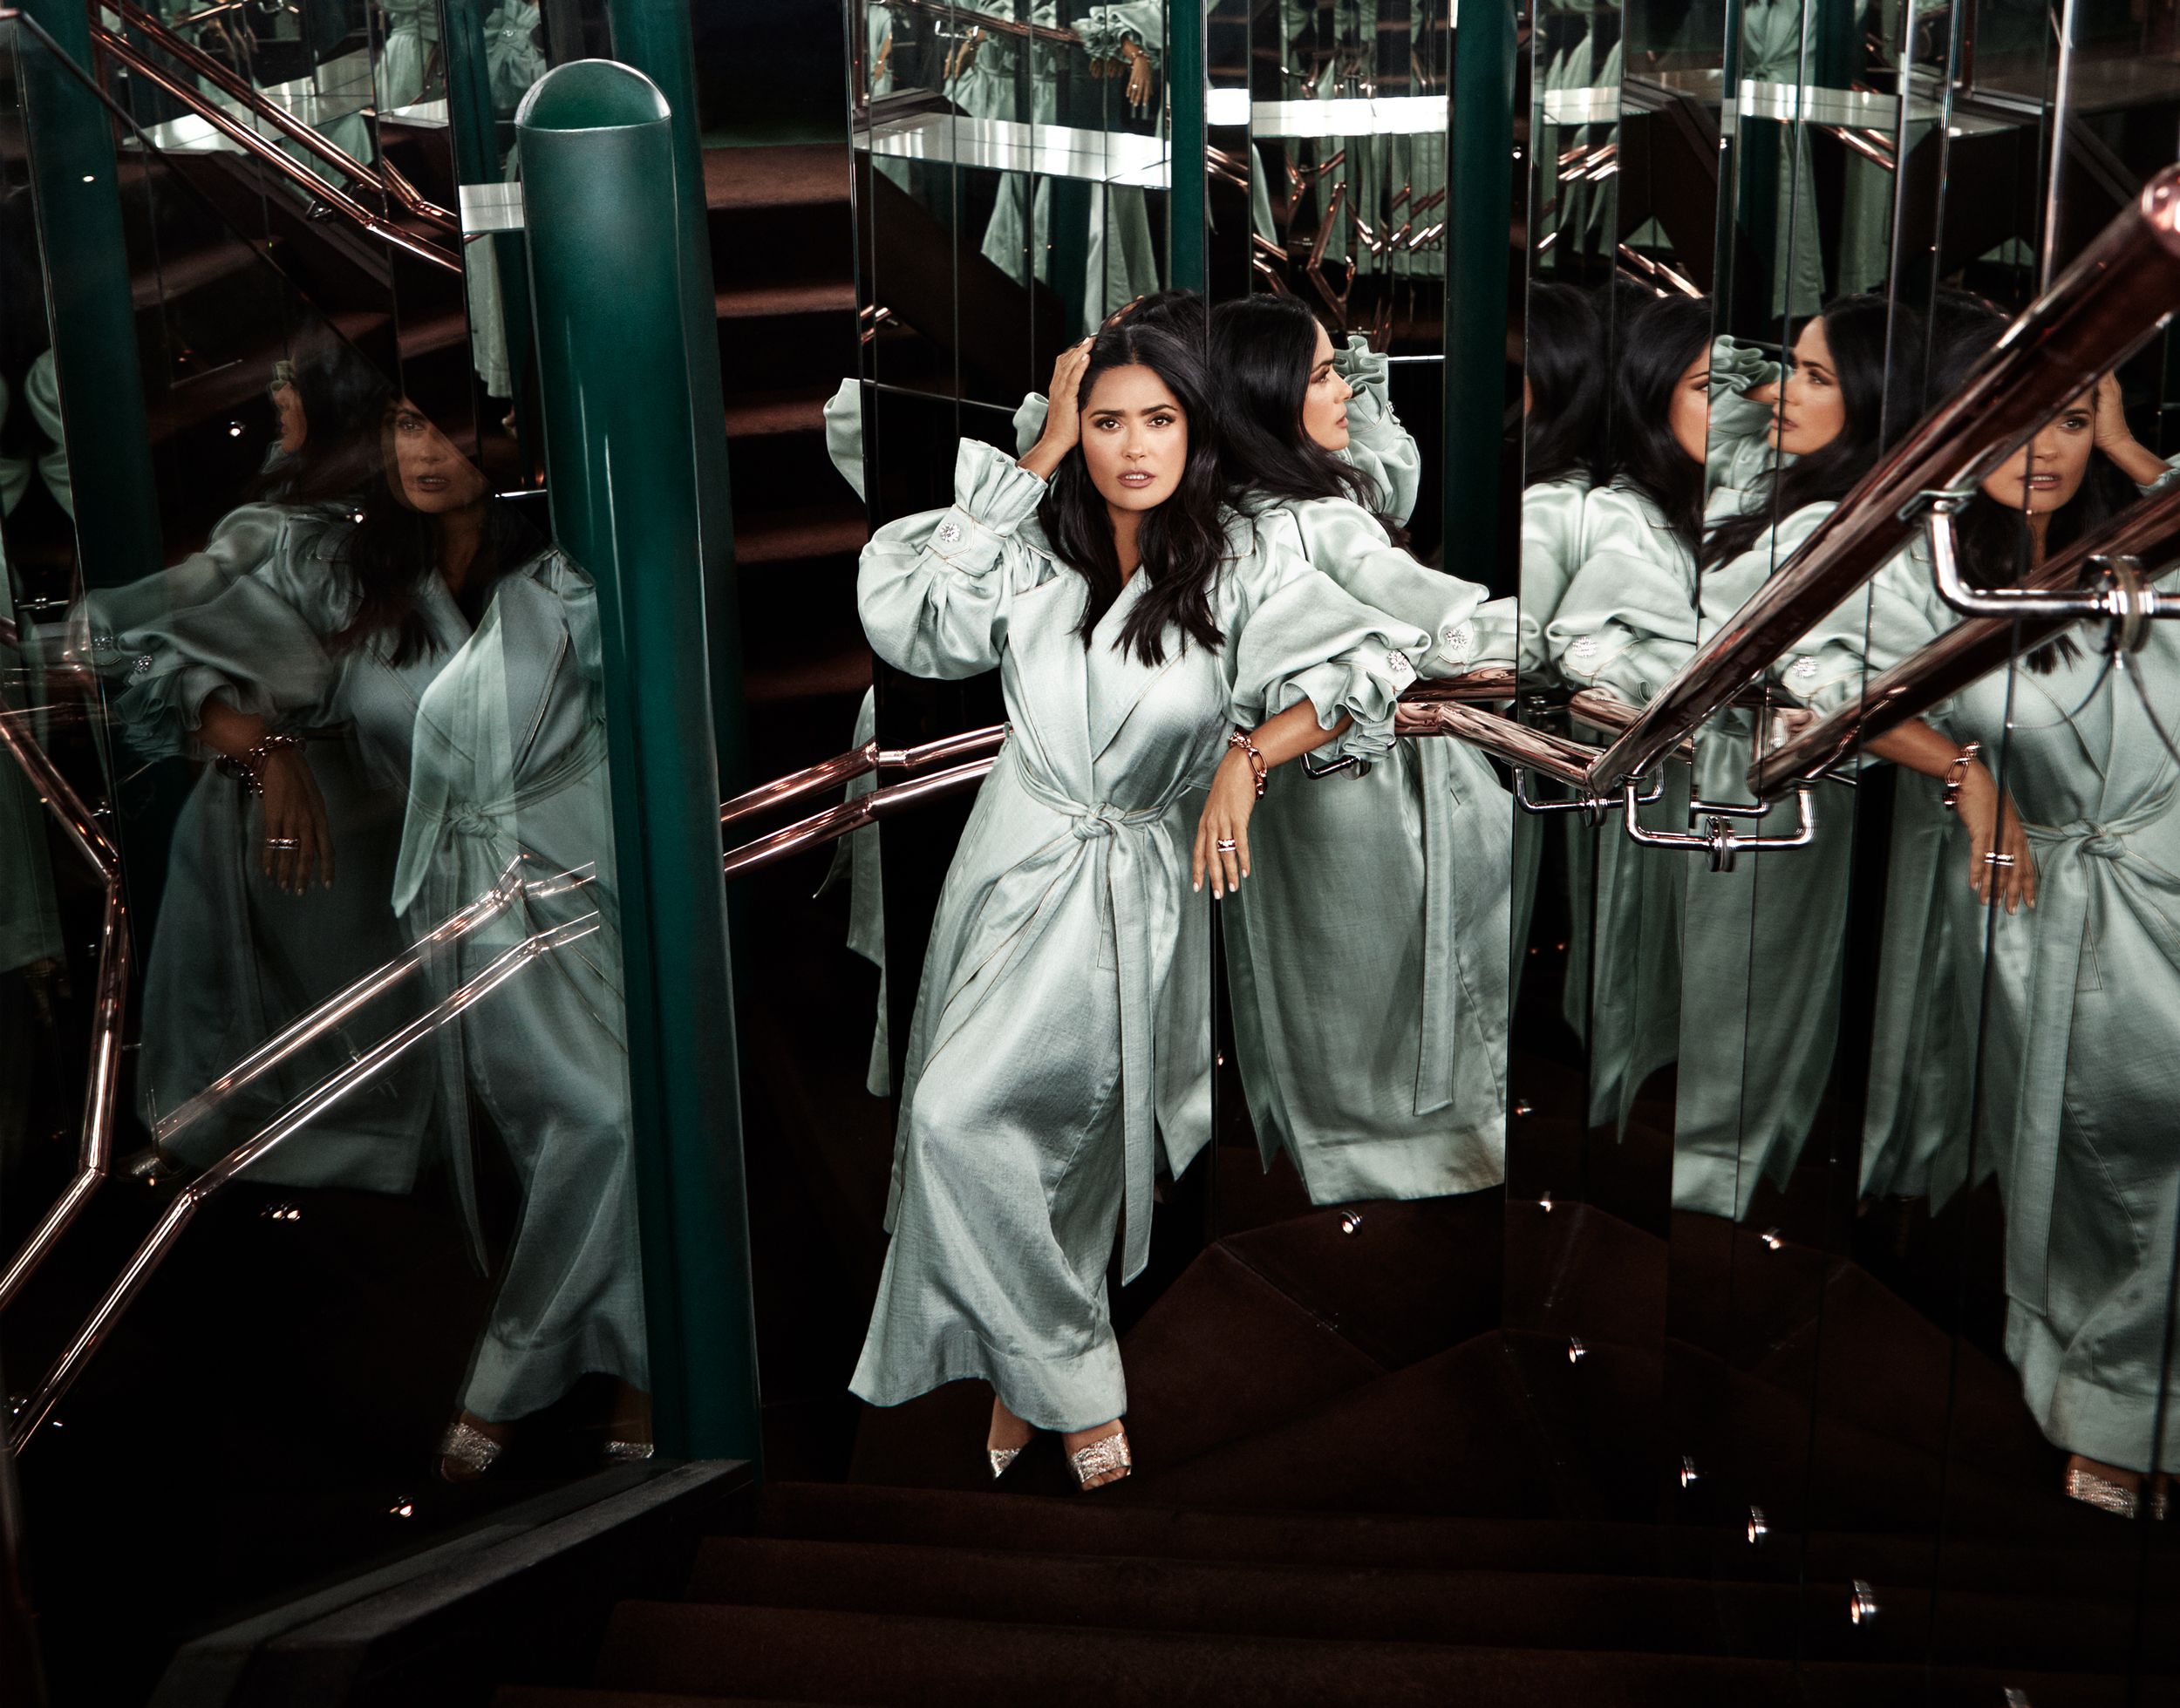 Salma Hayek on Marriage, Hollywood Racism, and Harvey Weinstein